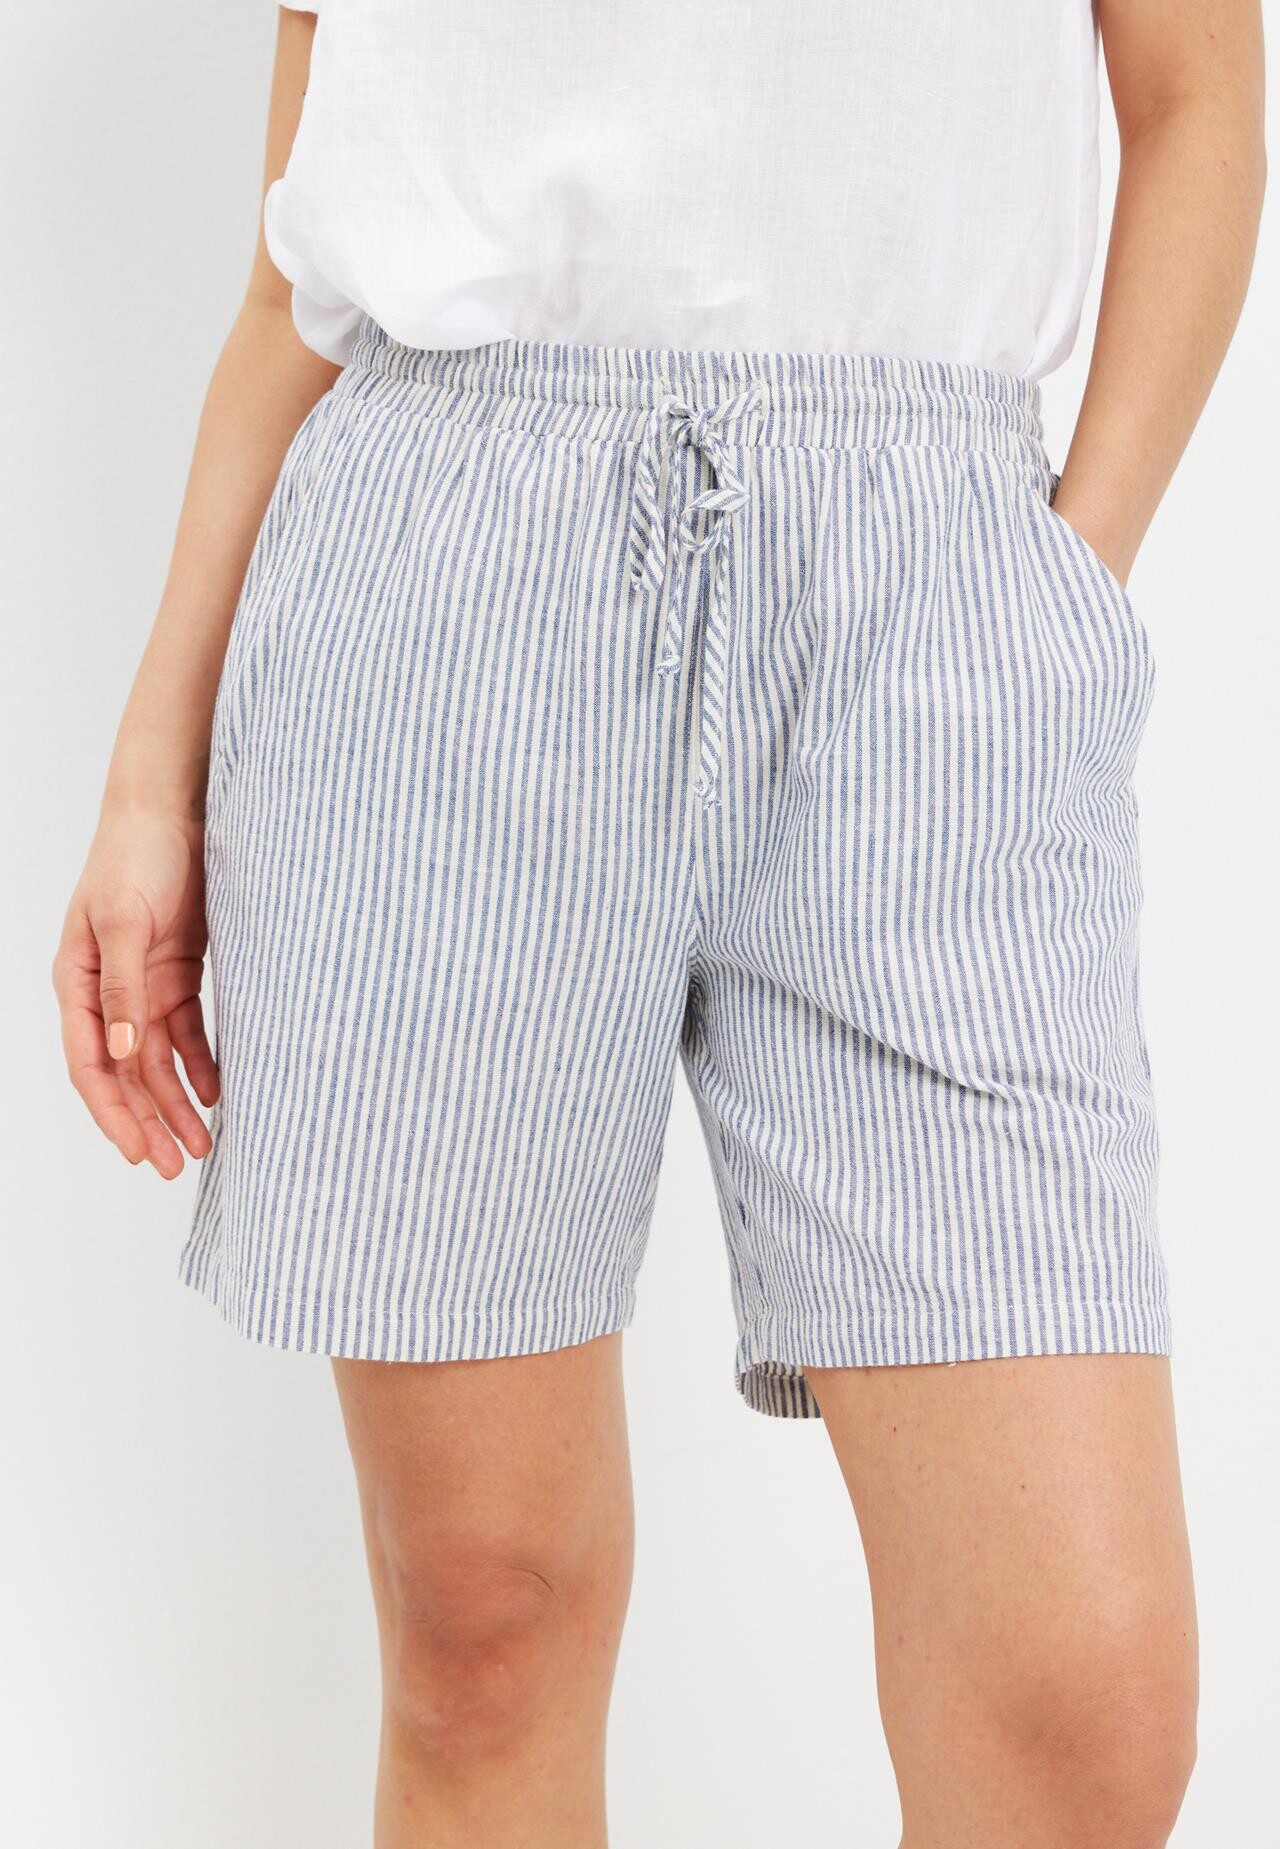 IN FRONT CHRISSY SHORTS 15712 501 (Blue 501)